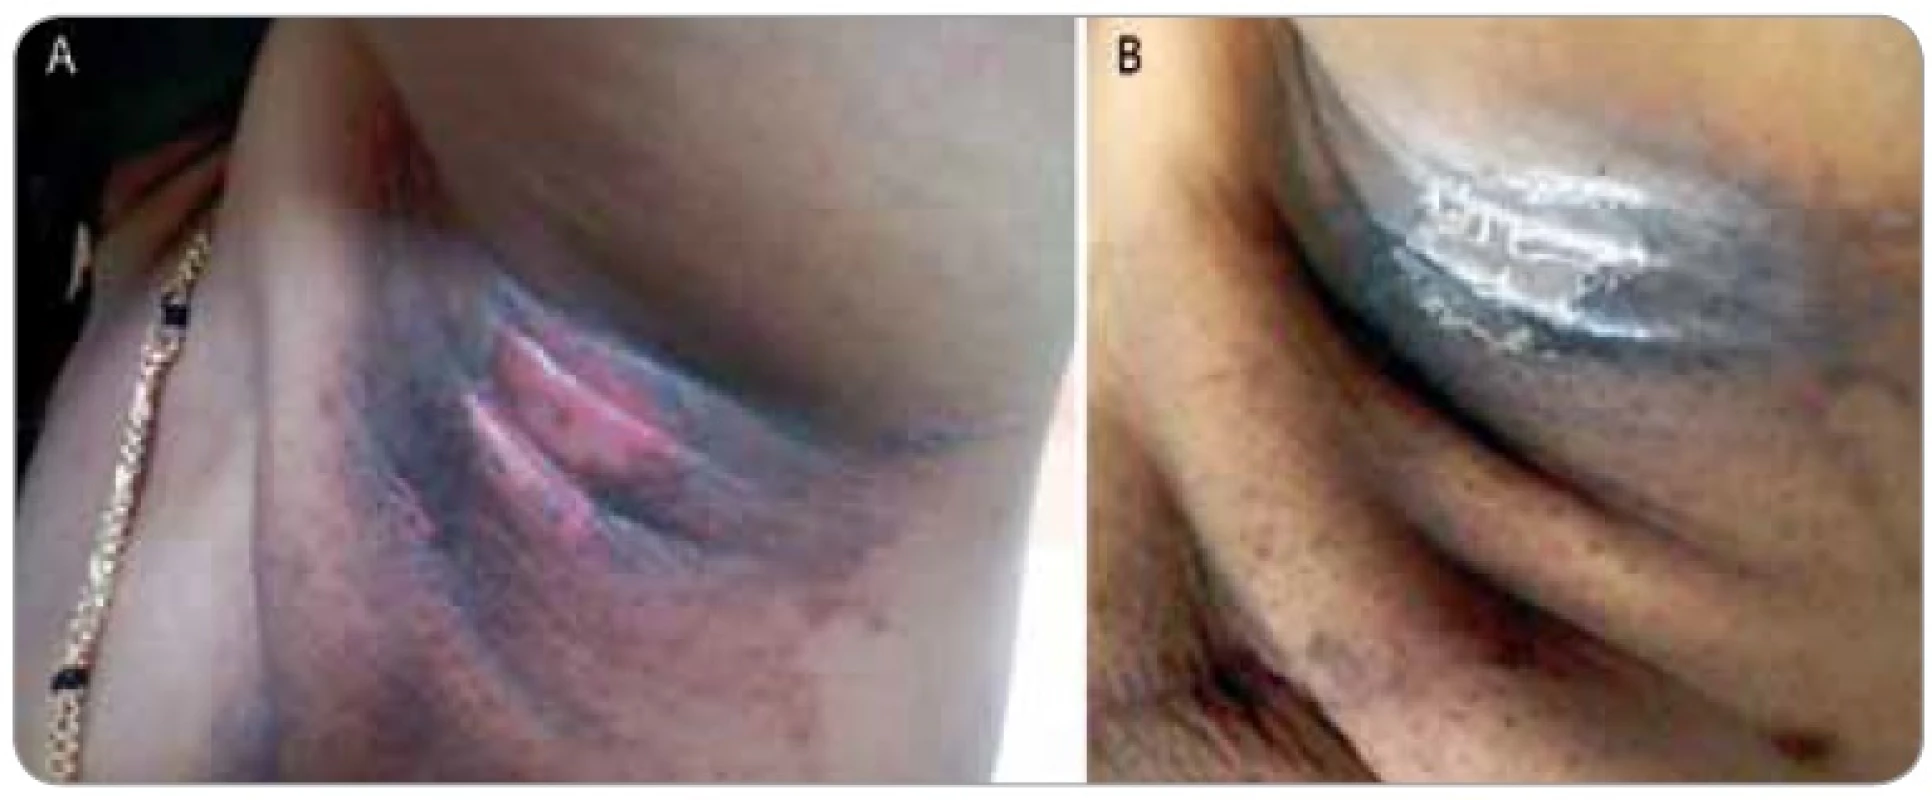 Shows a female patient who completed 50 Gy in 25 fractions radiotherapy for a breast cancer presented with grade III moist dequmation in the axillary fold (Superficial dermal exposure) (1A). The patient was referred to us for cytokine therapy. The skin ulceration healed in the next 4 days after GCSF injection (1B).